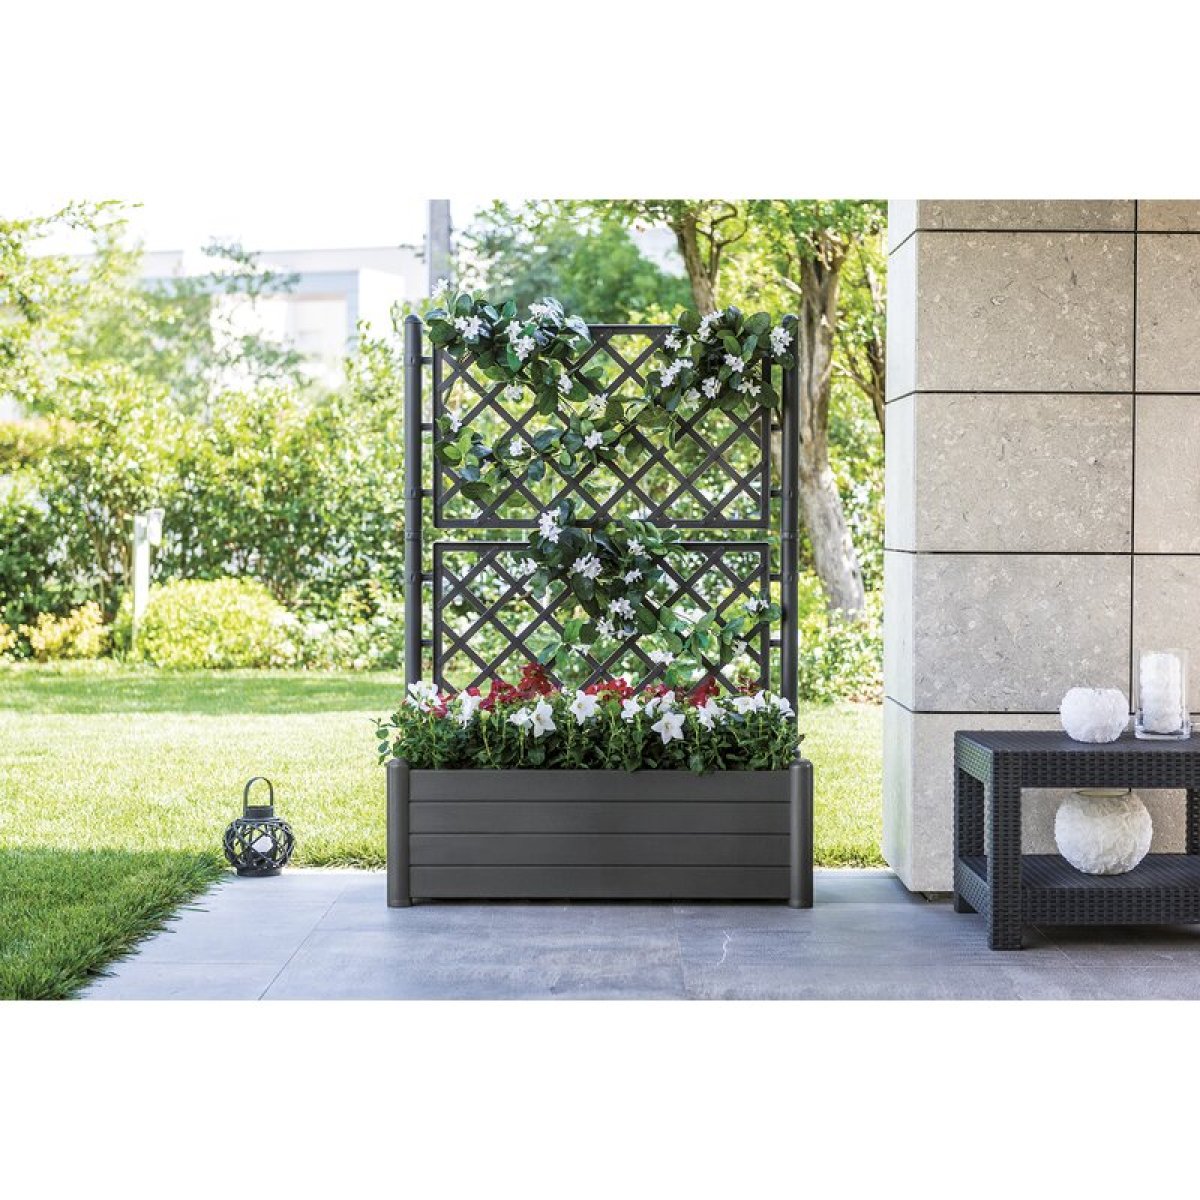  Sol 72 Outdoor Elevated Planter With Trellis